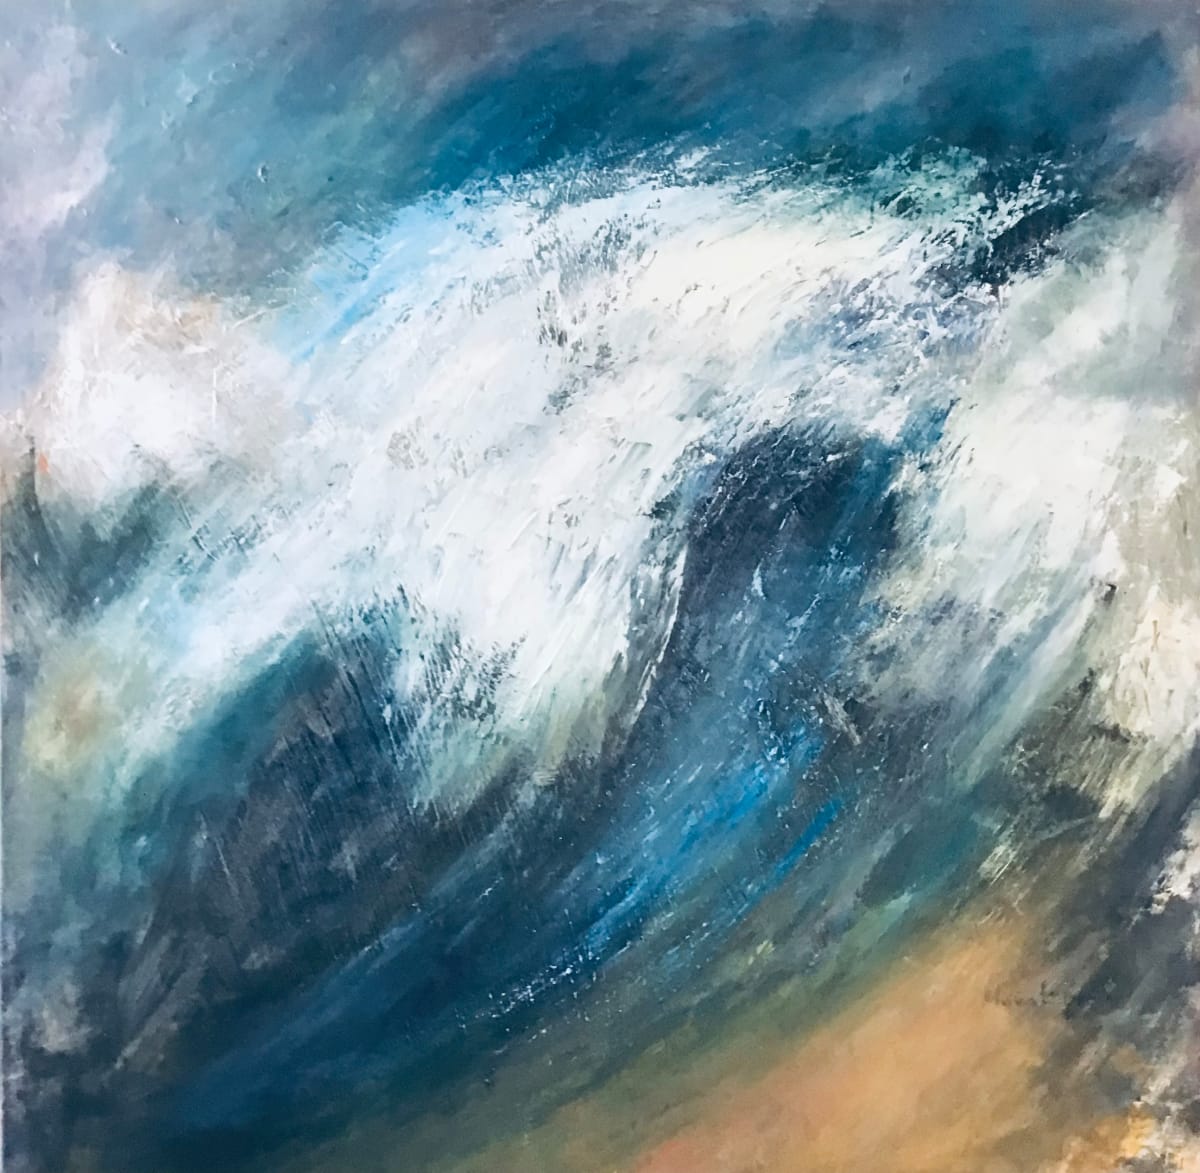 High Seas by Marina Emphietzi  Image: Marina is well known for her evocative seascape paintings. Her works depict strong emotions and intense energy while also telling a story. They serve as a metaphor for our passing through life and living in a world where materialism and technology are dominant; they convey feelings of memory, time, happiness, sorrow, and even "nostos" (the Greek word for "homecoming"). Her paintings, created with vigour, have playful textures and a modern art style. They bring up faded memories of being near water, the sound of rumbling waves, and the sensation of a warm breeze across skin. Her artworks, a metaphor for the transient human experience, suggest that we flow through life, ever-changing. Marina wants her art to relate to our human desire to hold onto our memories across time.